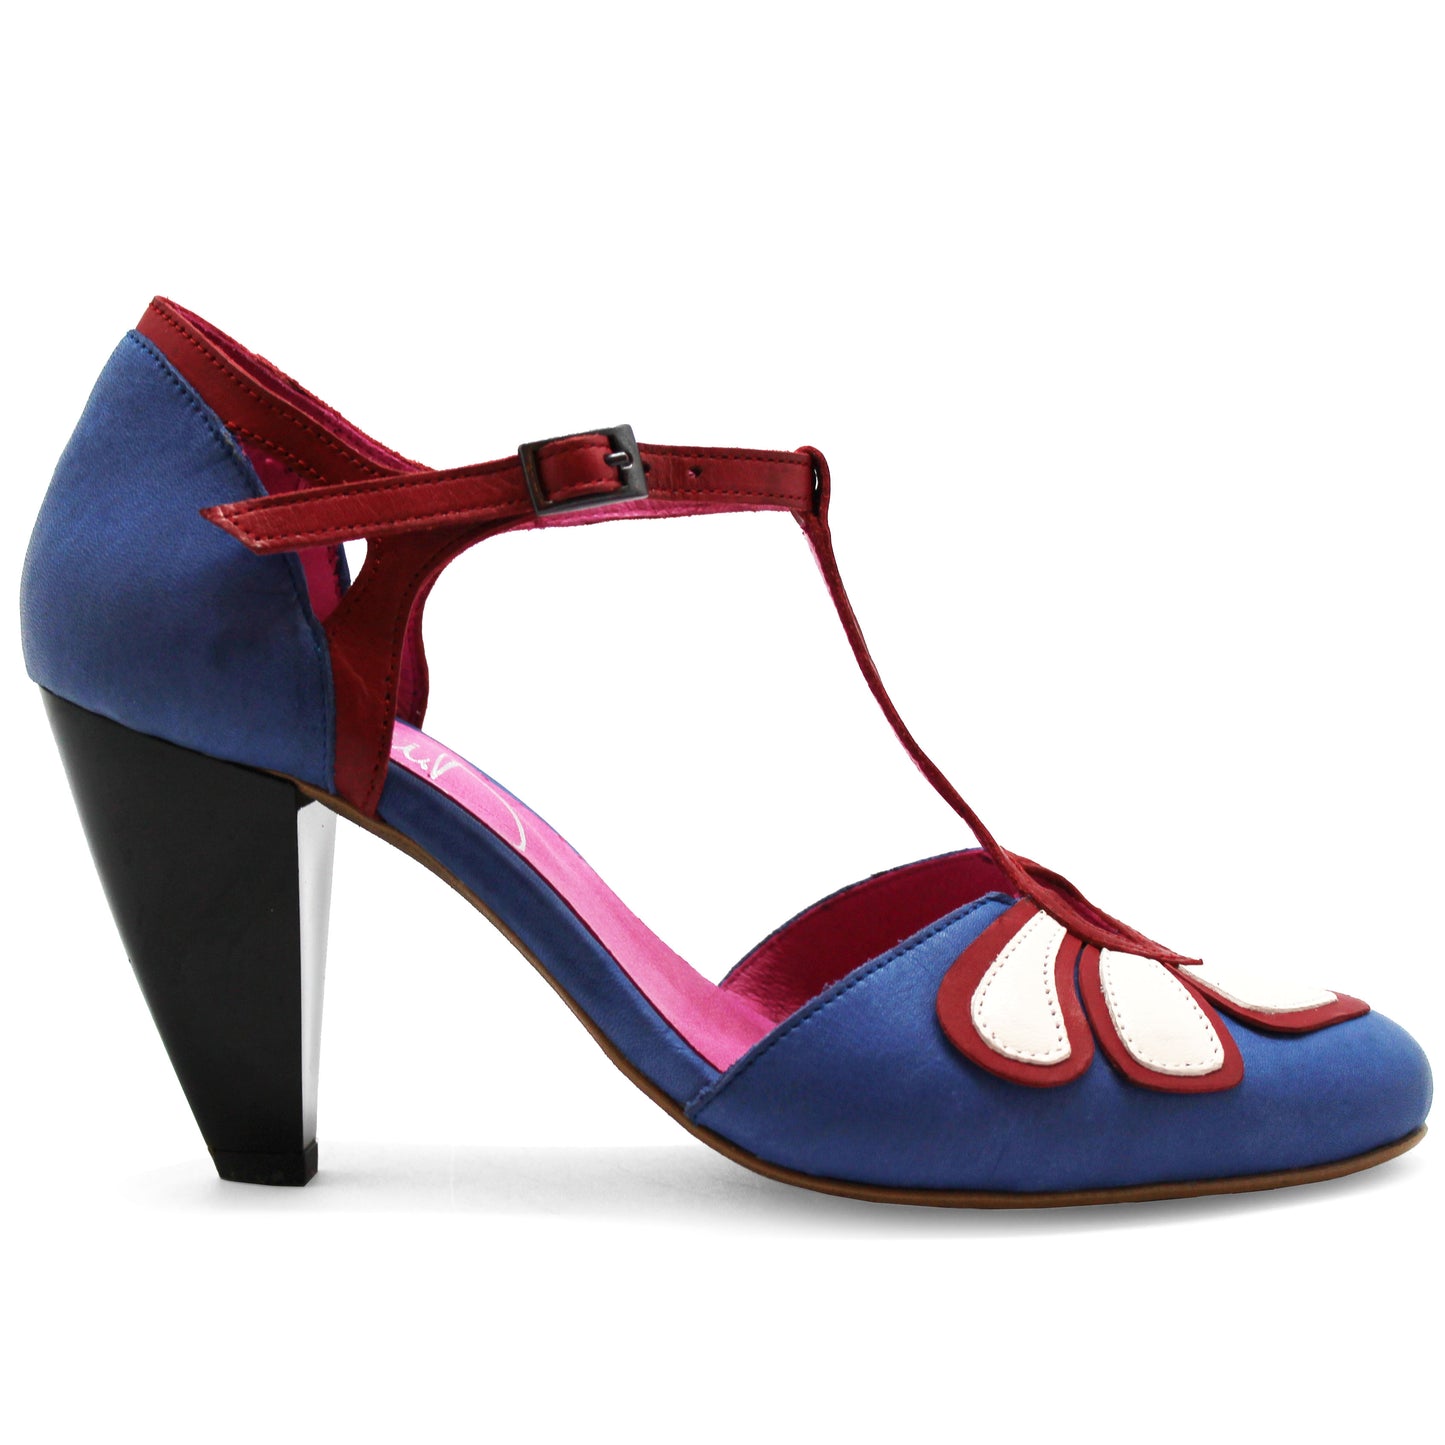 Petal - Blue, Red and White t strap shoe